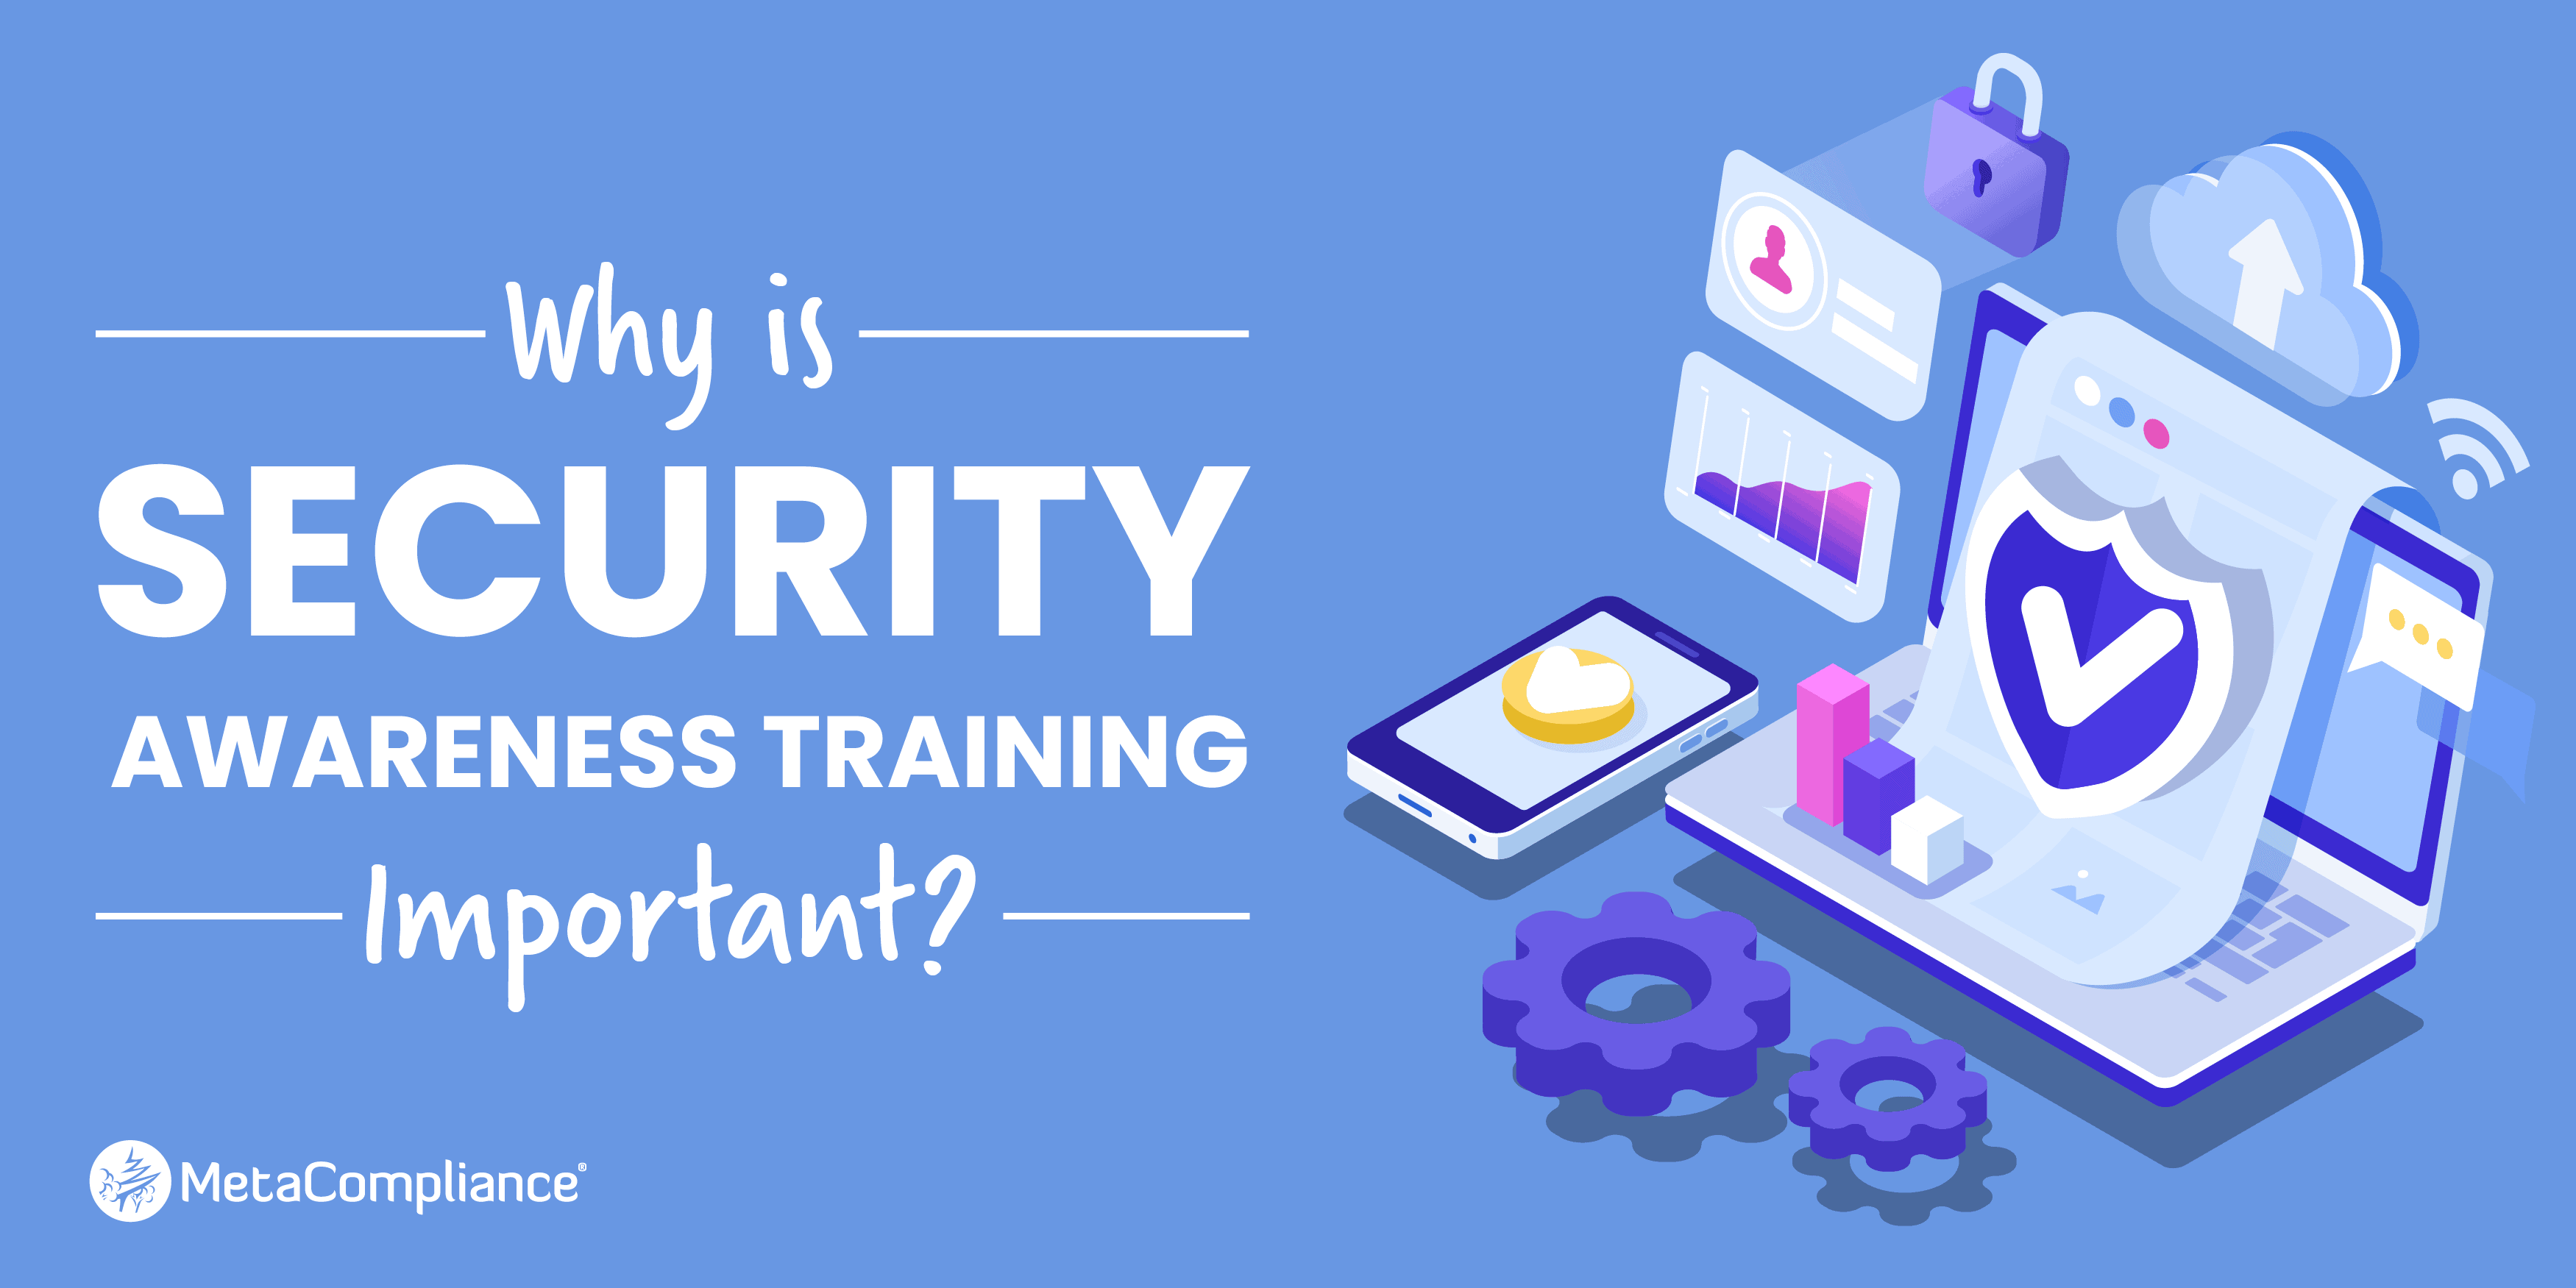 Why is Cyber Security Awareness Training Important?